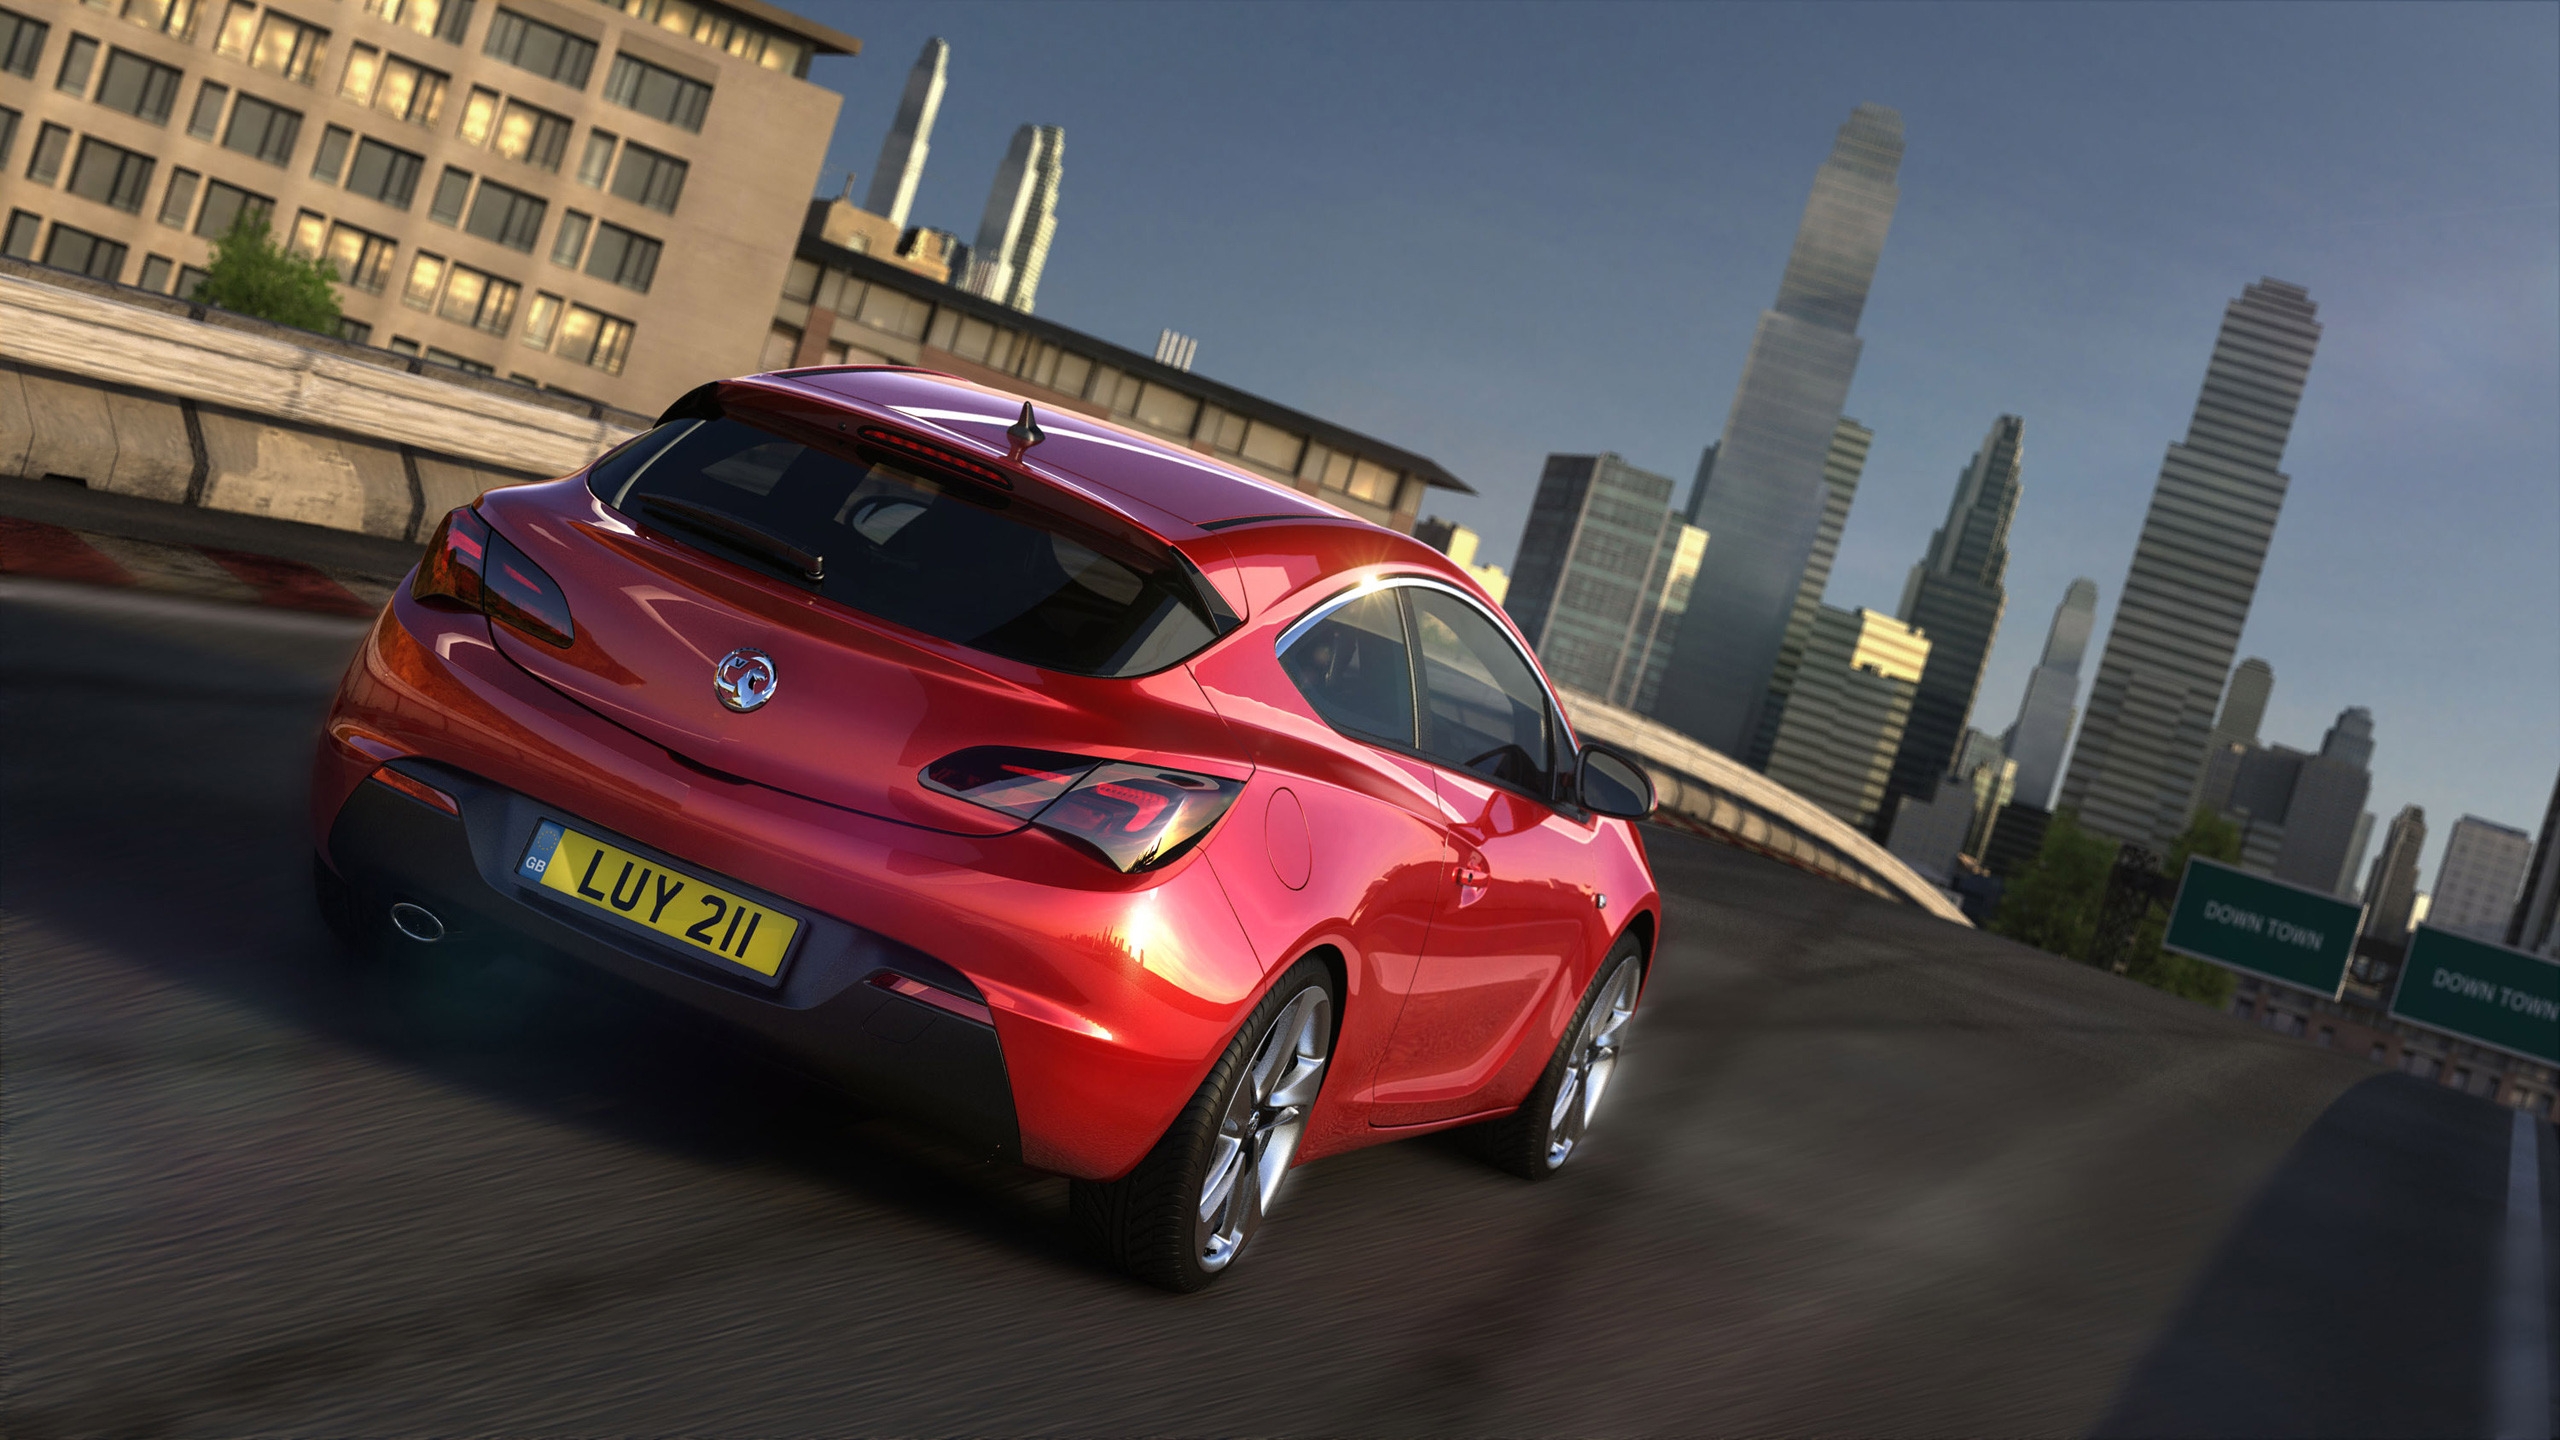 2012 Vauxhall Astra GTC Speed for 2560x1440 HDTV resolution